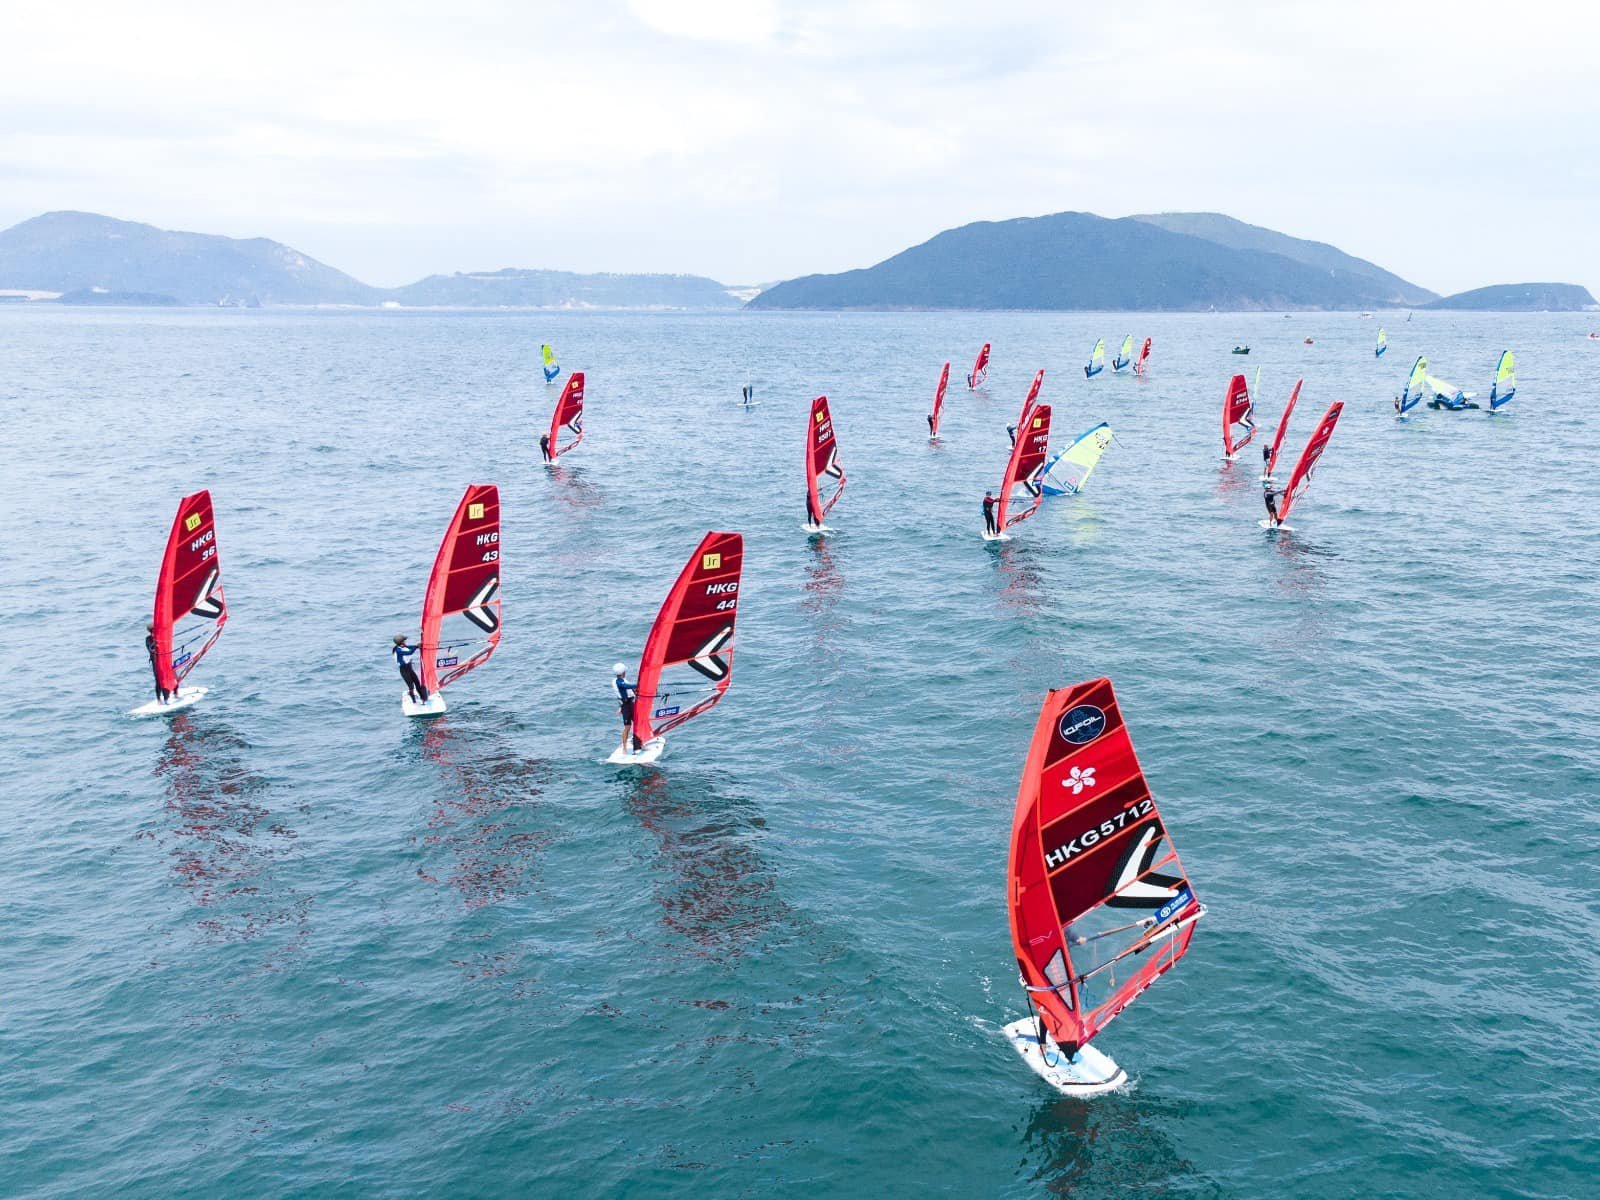 Due to the light wind at Shek O, only two races were held today on the final leg of the Hong Kong windsurfing circuit. Photo: Windsurfing Association of Hong Kong